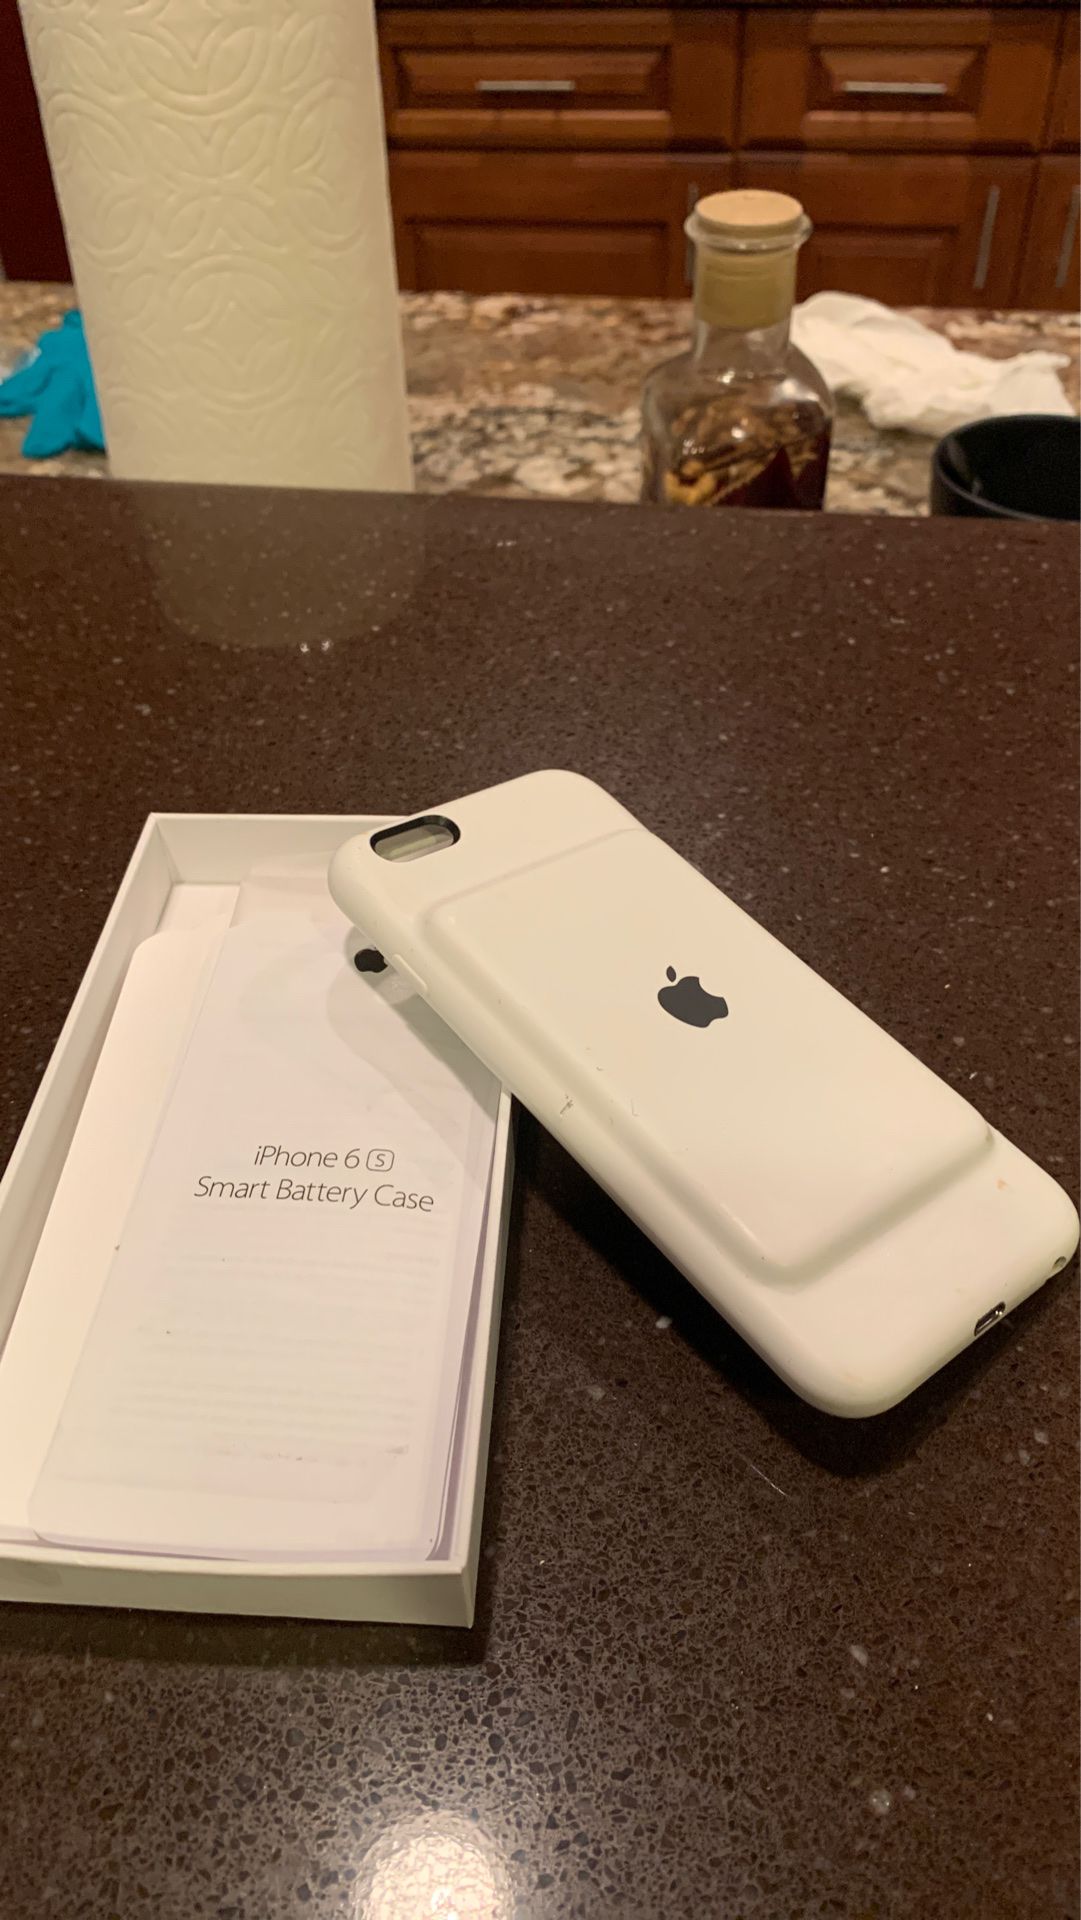 White iPhone 6s smart battery case